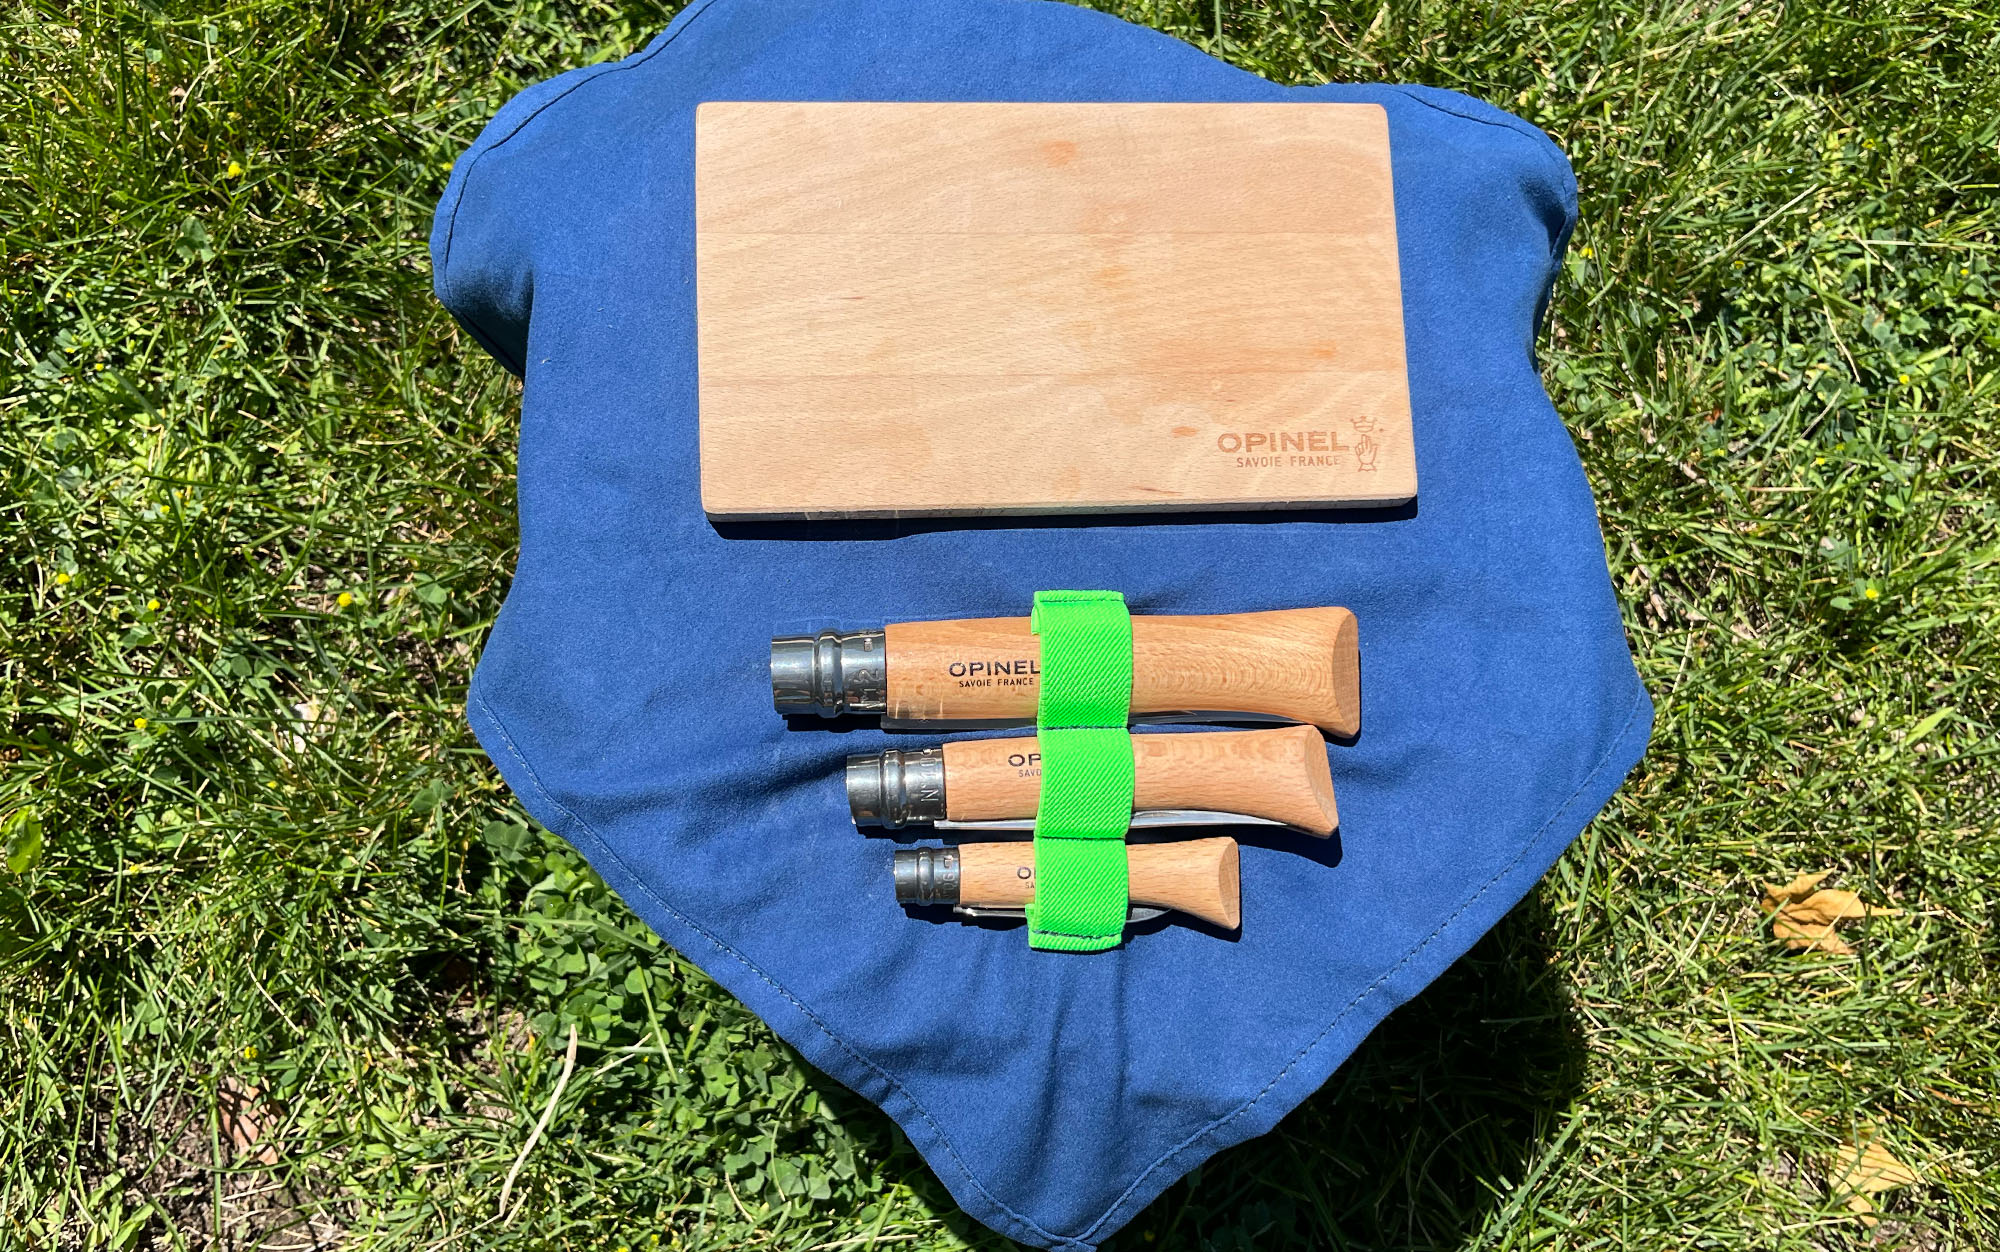 The Opinel Cooking Kit is laid out.